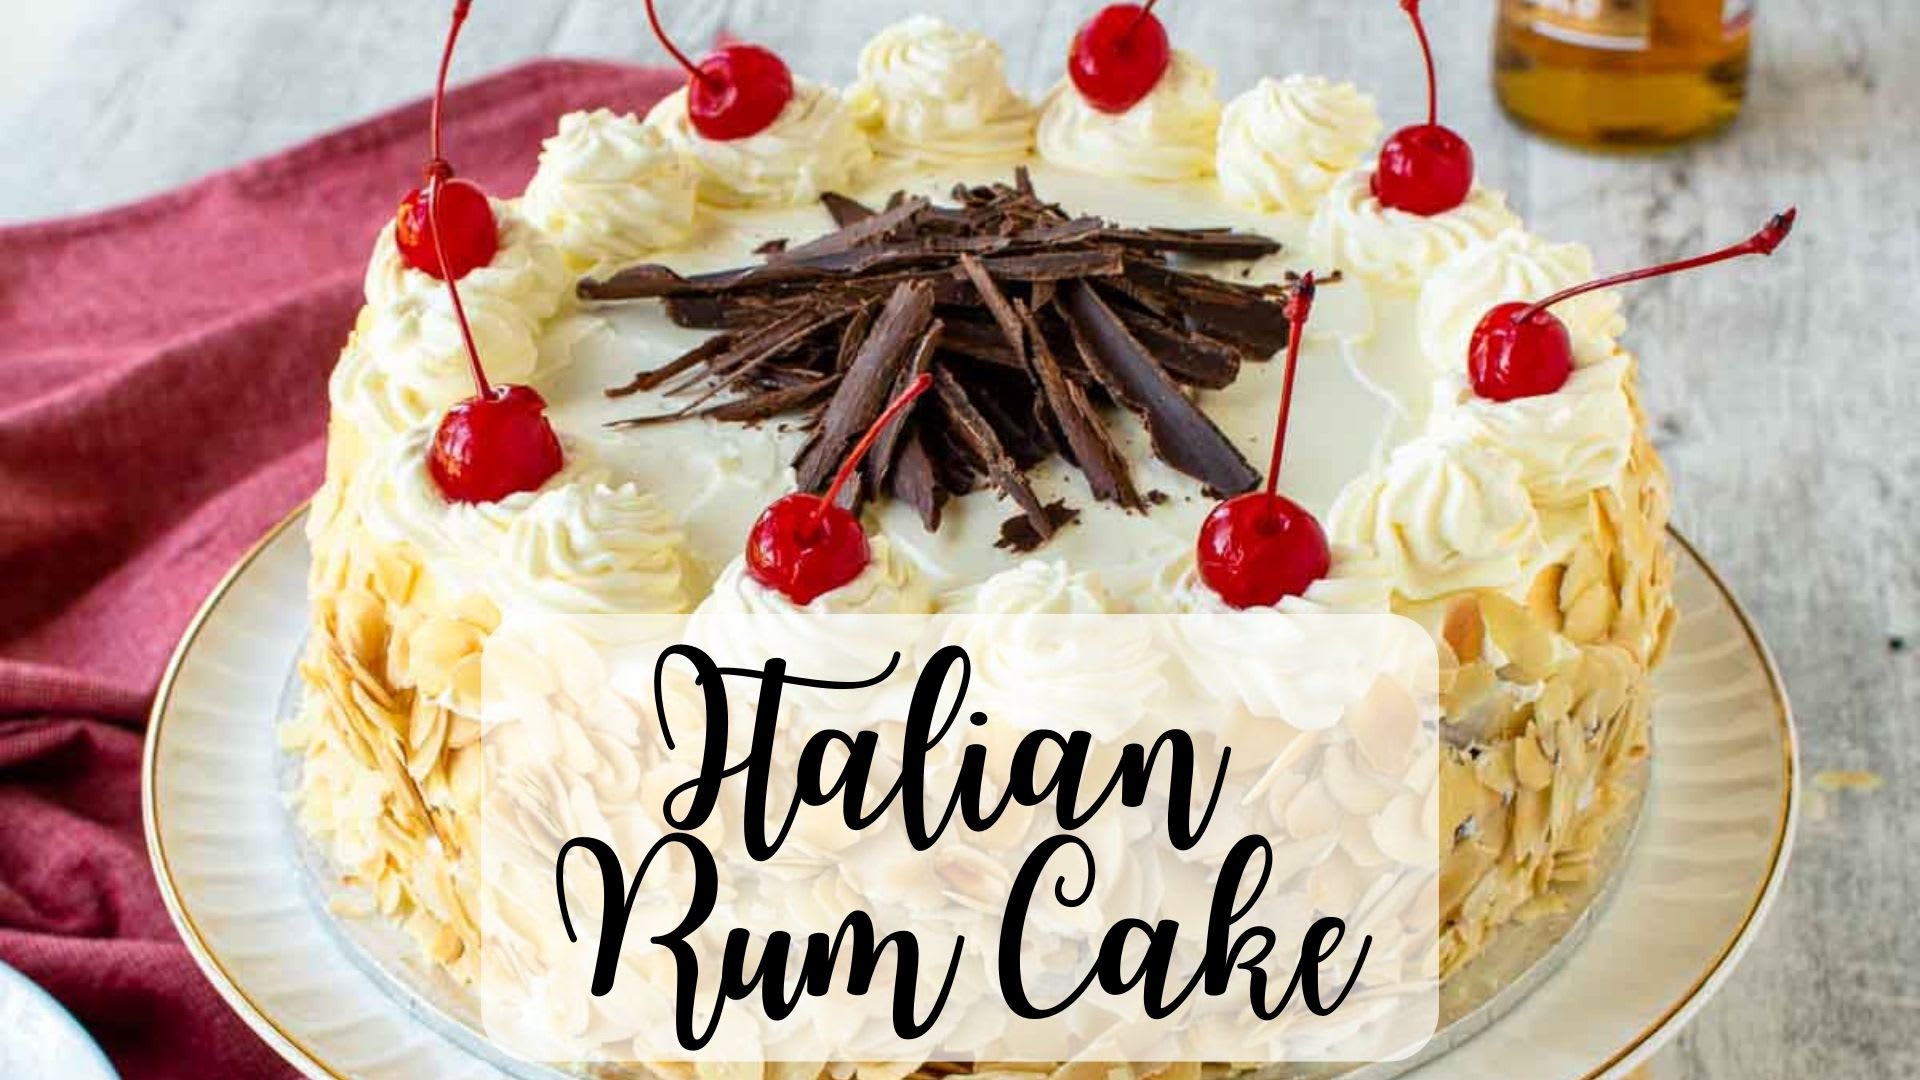 11 Italian Cream Cake Recipes to Satisfy Your Sweet Tooth! | DineWithDrinks